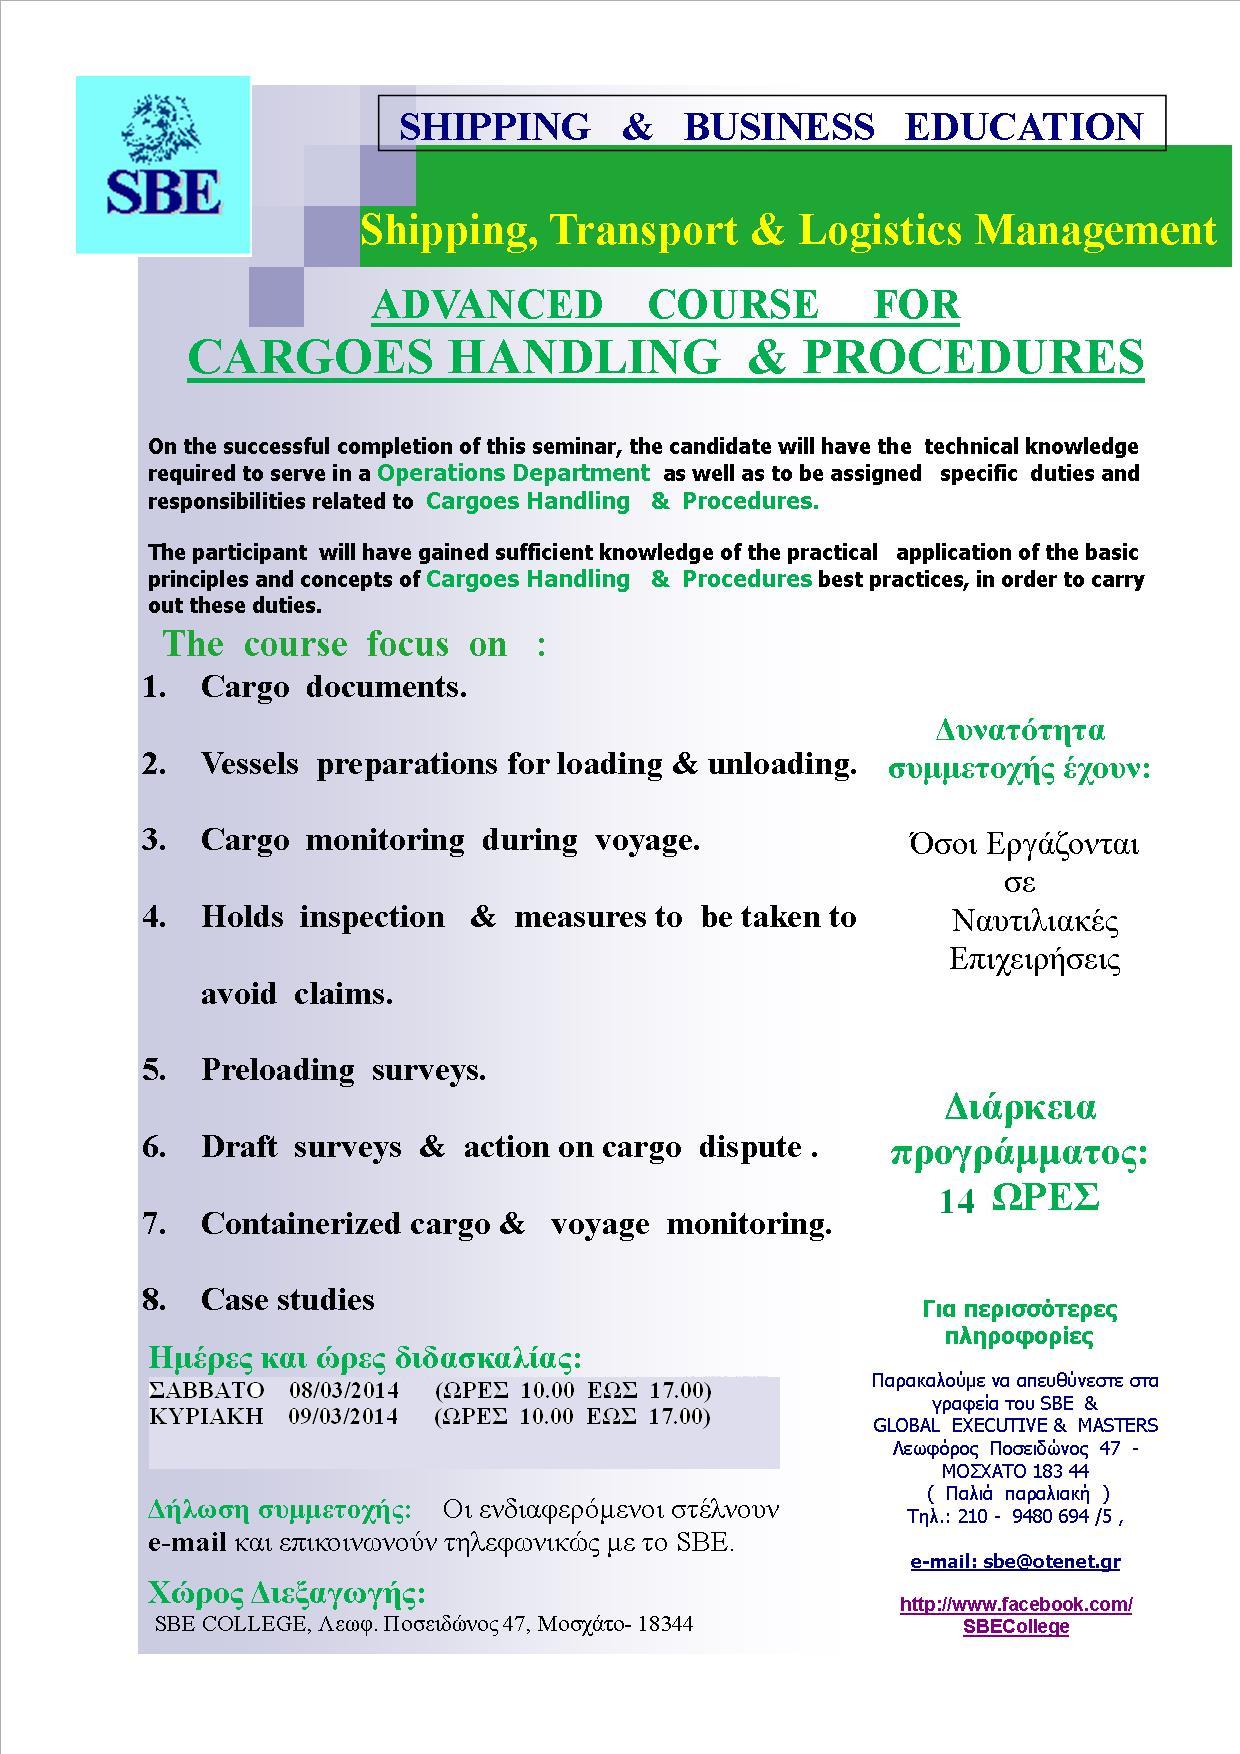 SBE – Advanced course for cargoes handling & procedures 08 & 09/03/2014